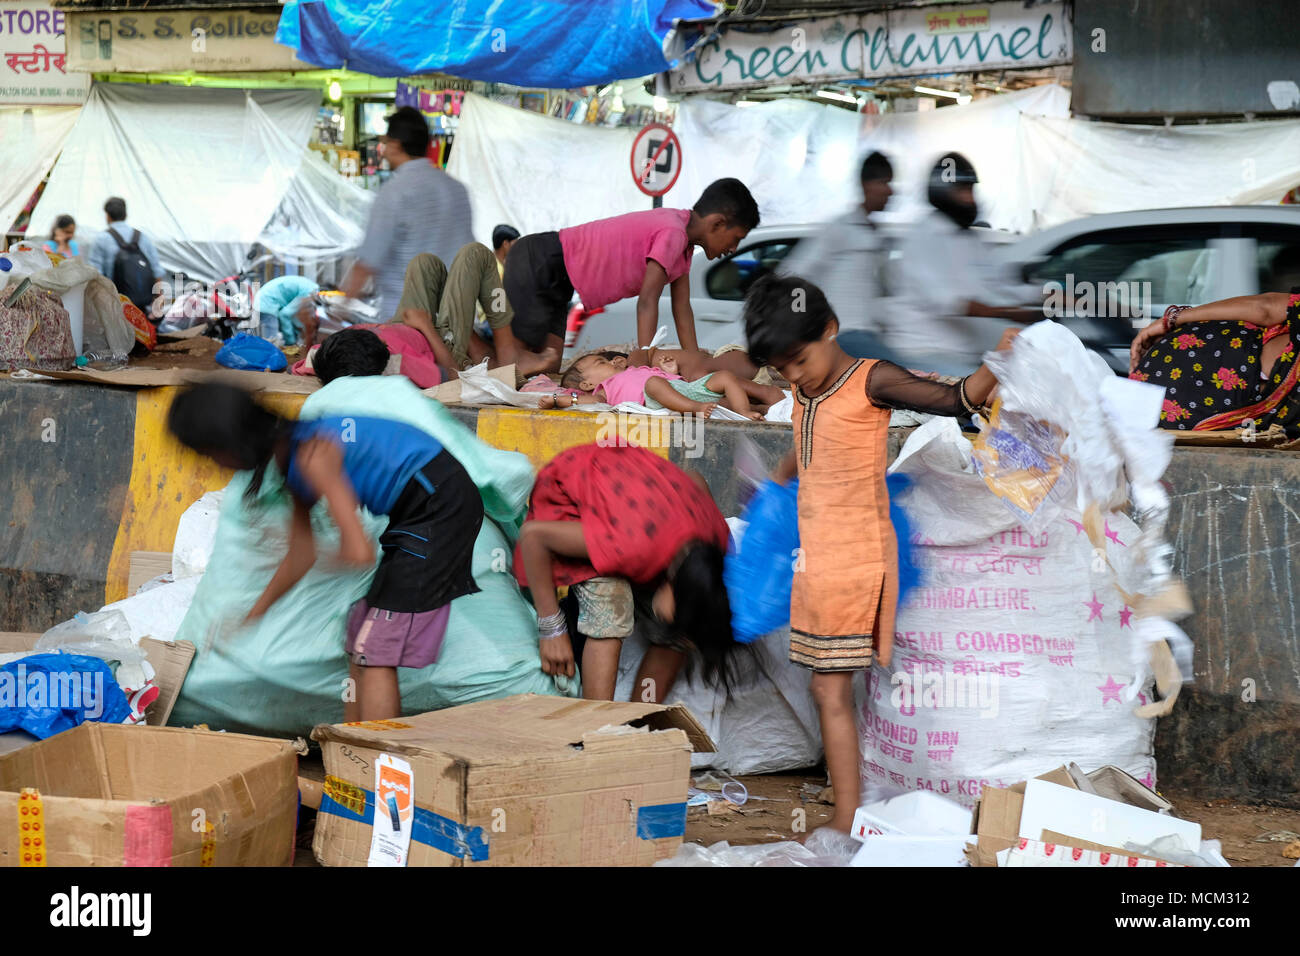 Street children working collecting cardboard and garbage in downtown Mumbai, India Stock Photo